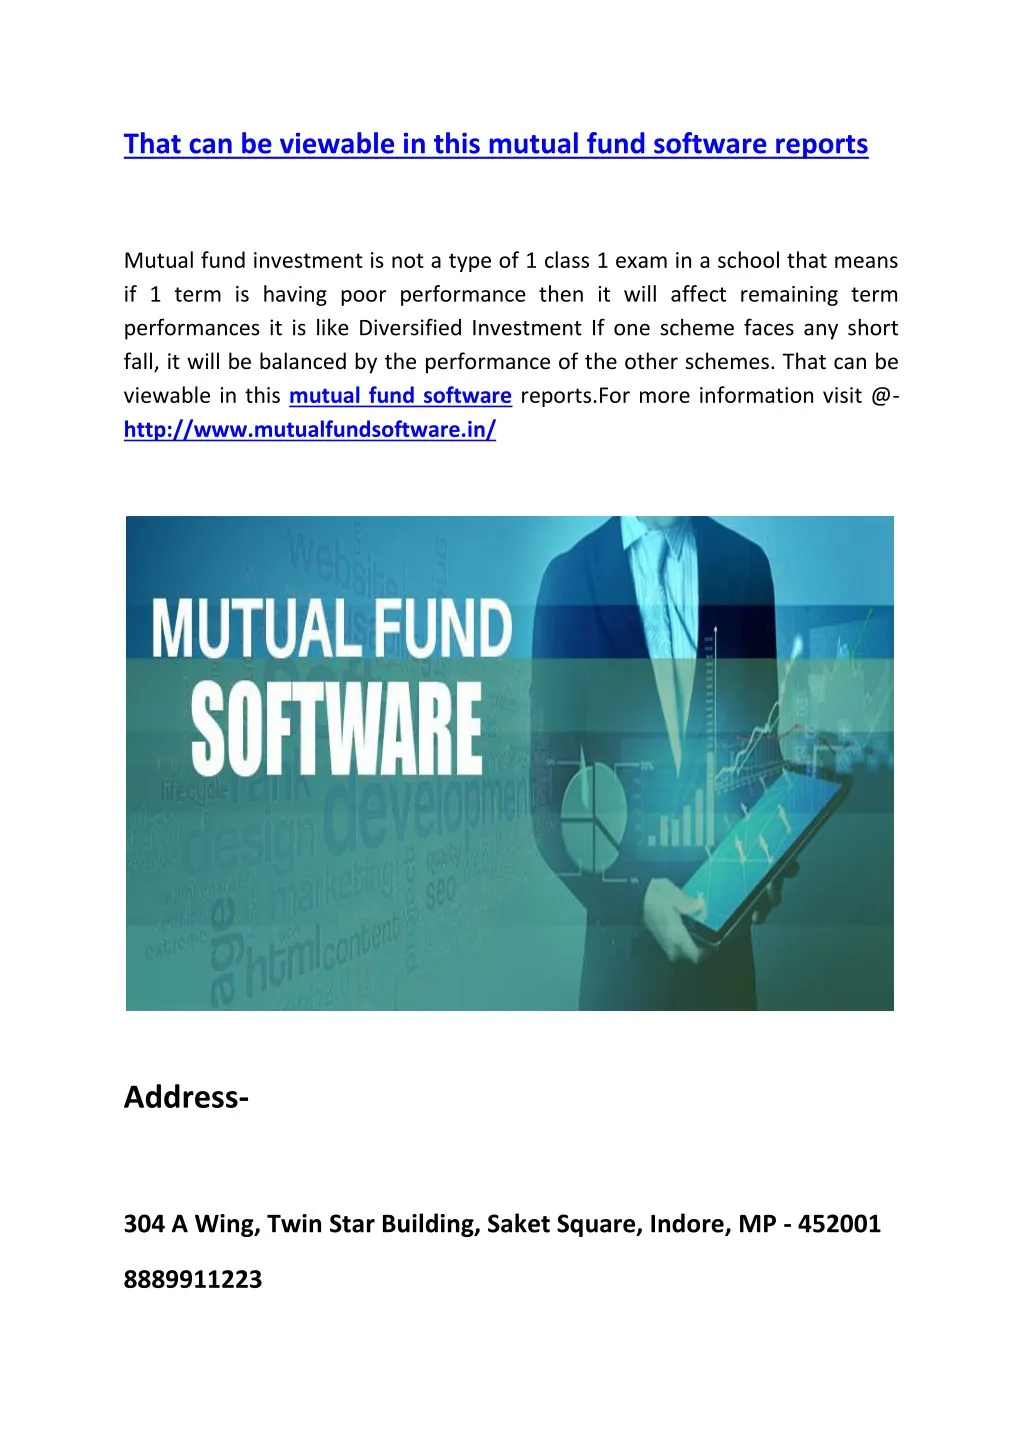 that can be viewable in this mutual fund software